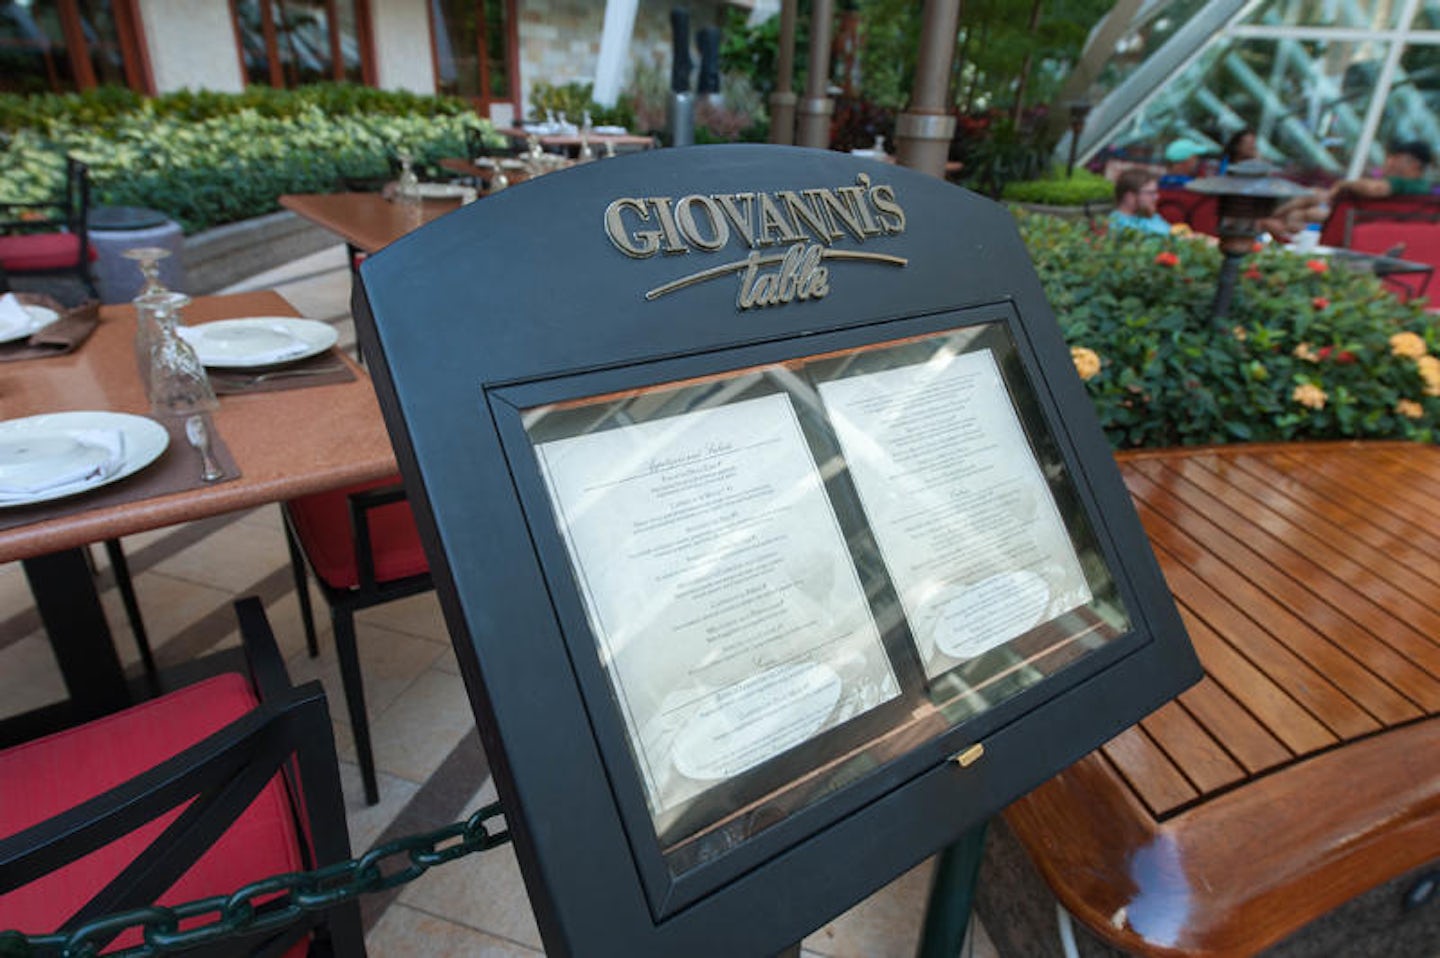 Giovanni's Table on Allure of the Seas